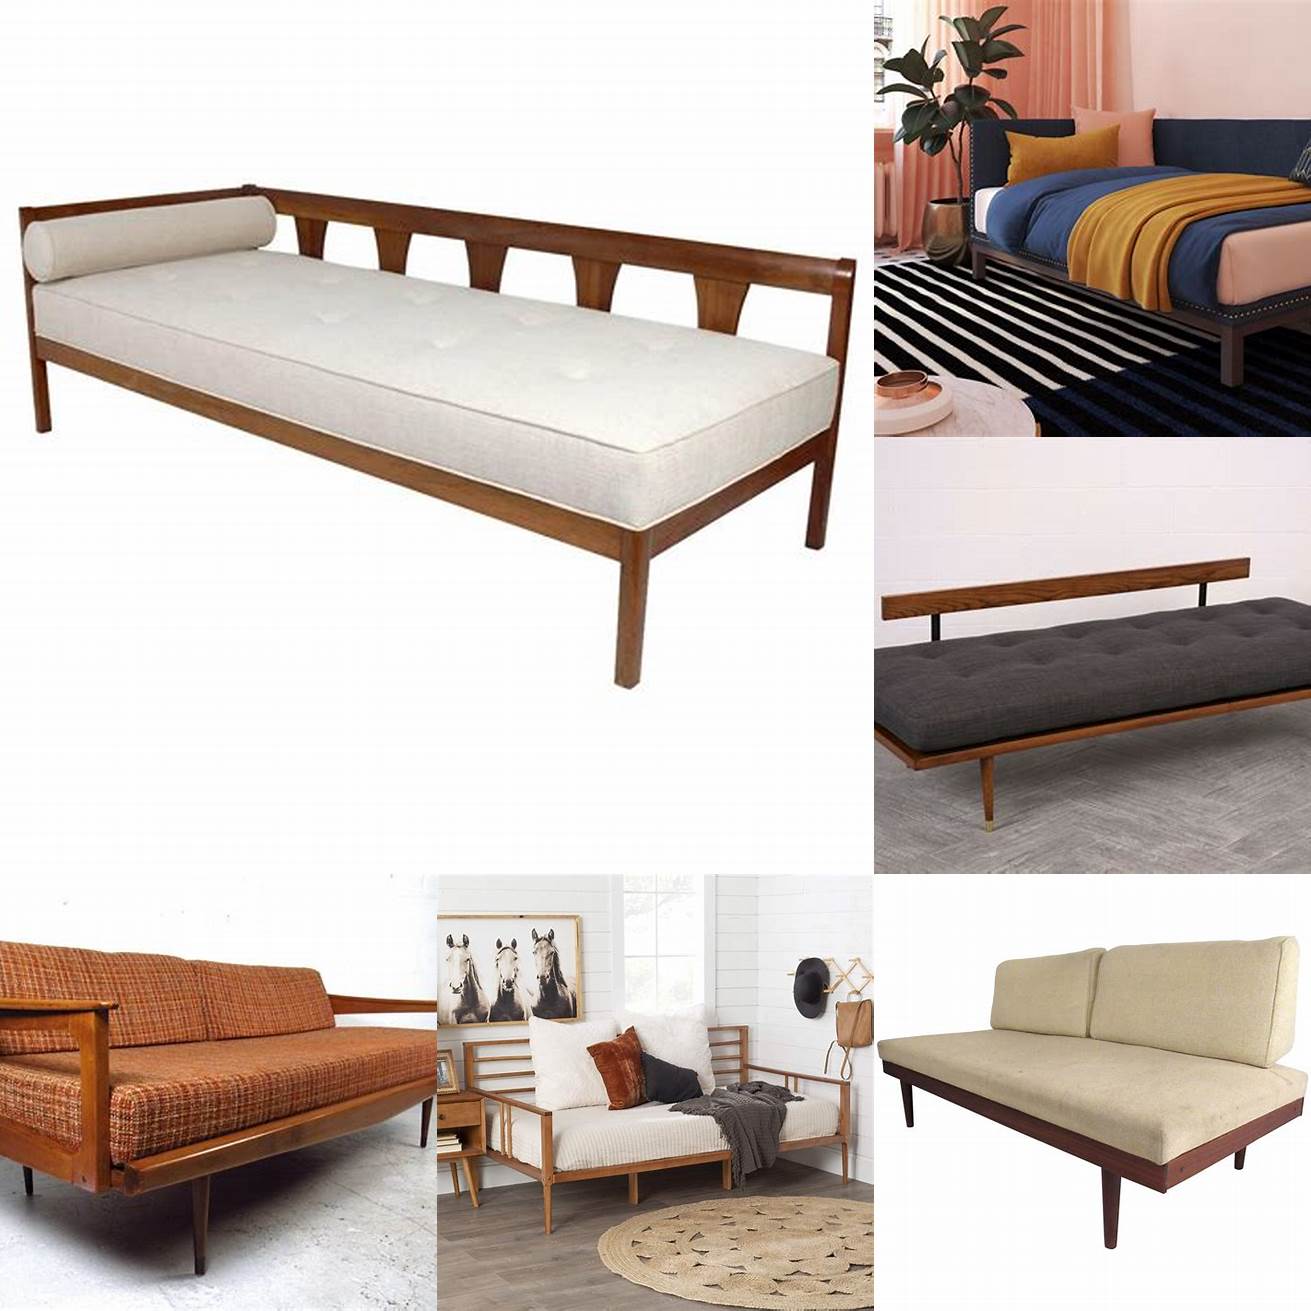 Mid-century modern day bed with tapered legs